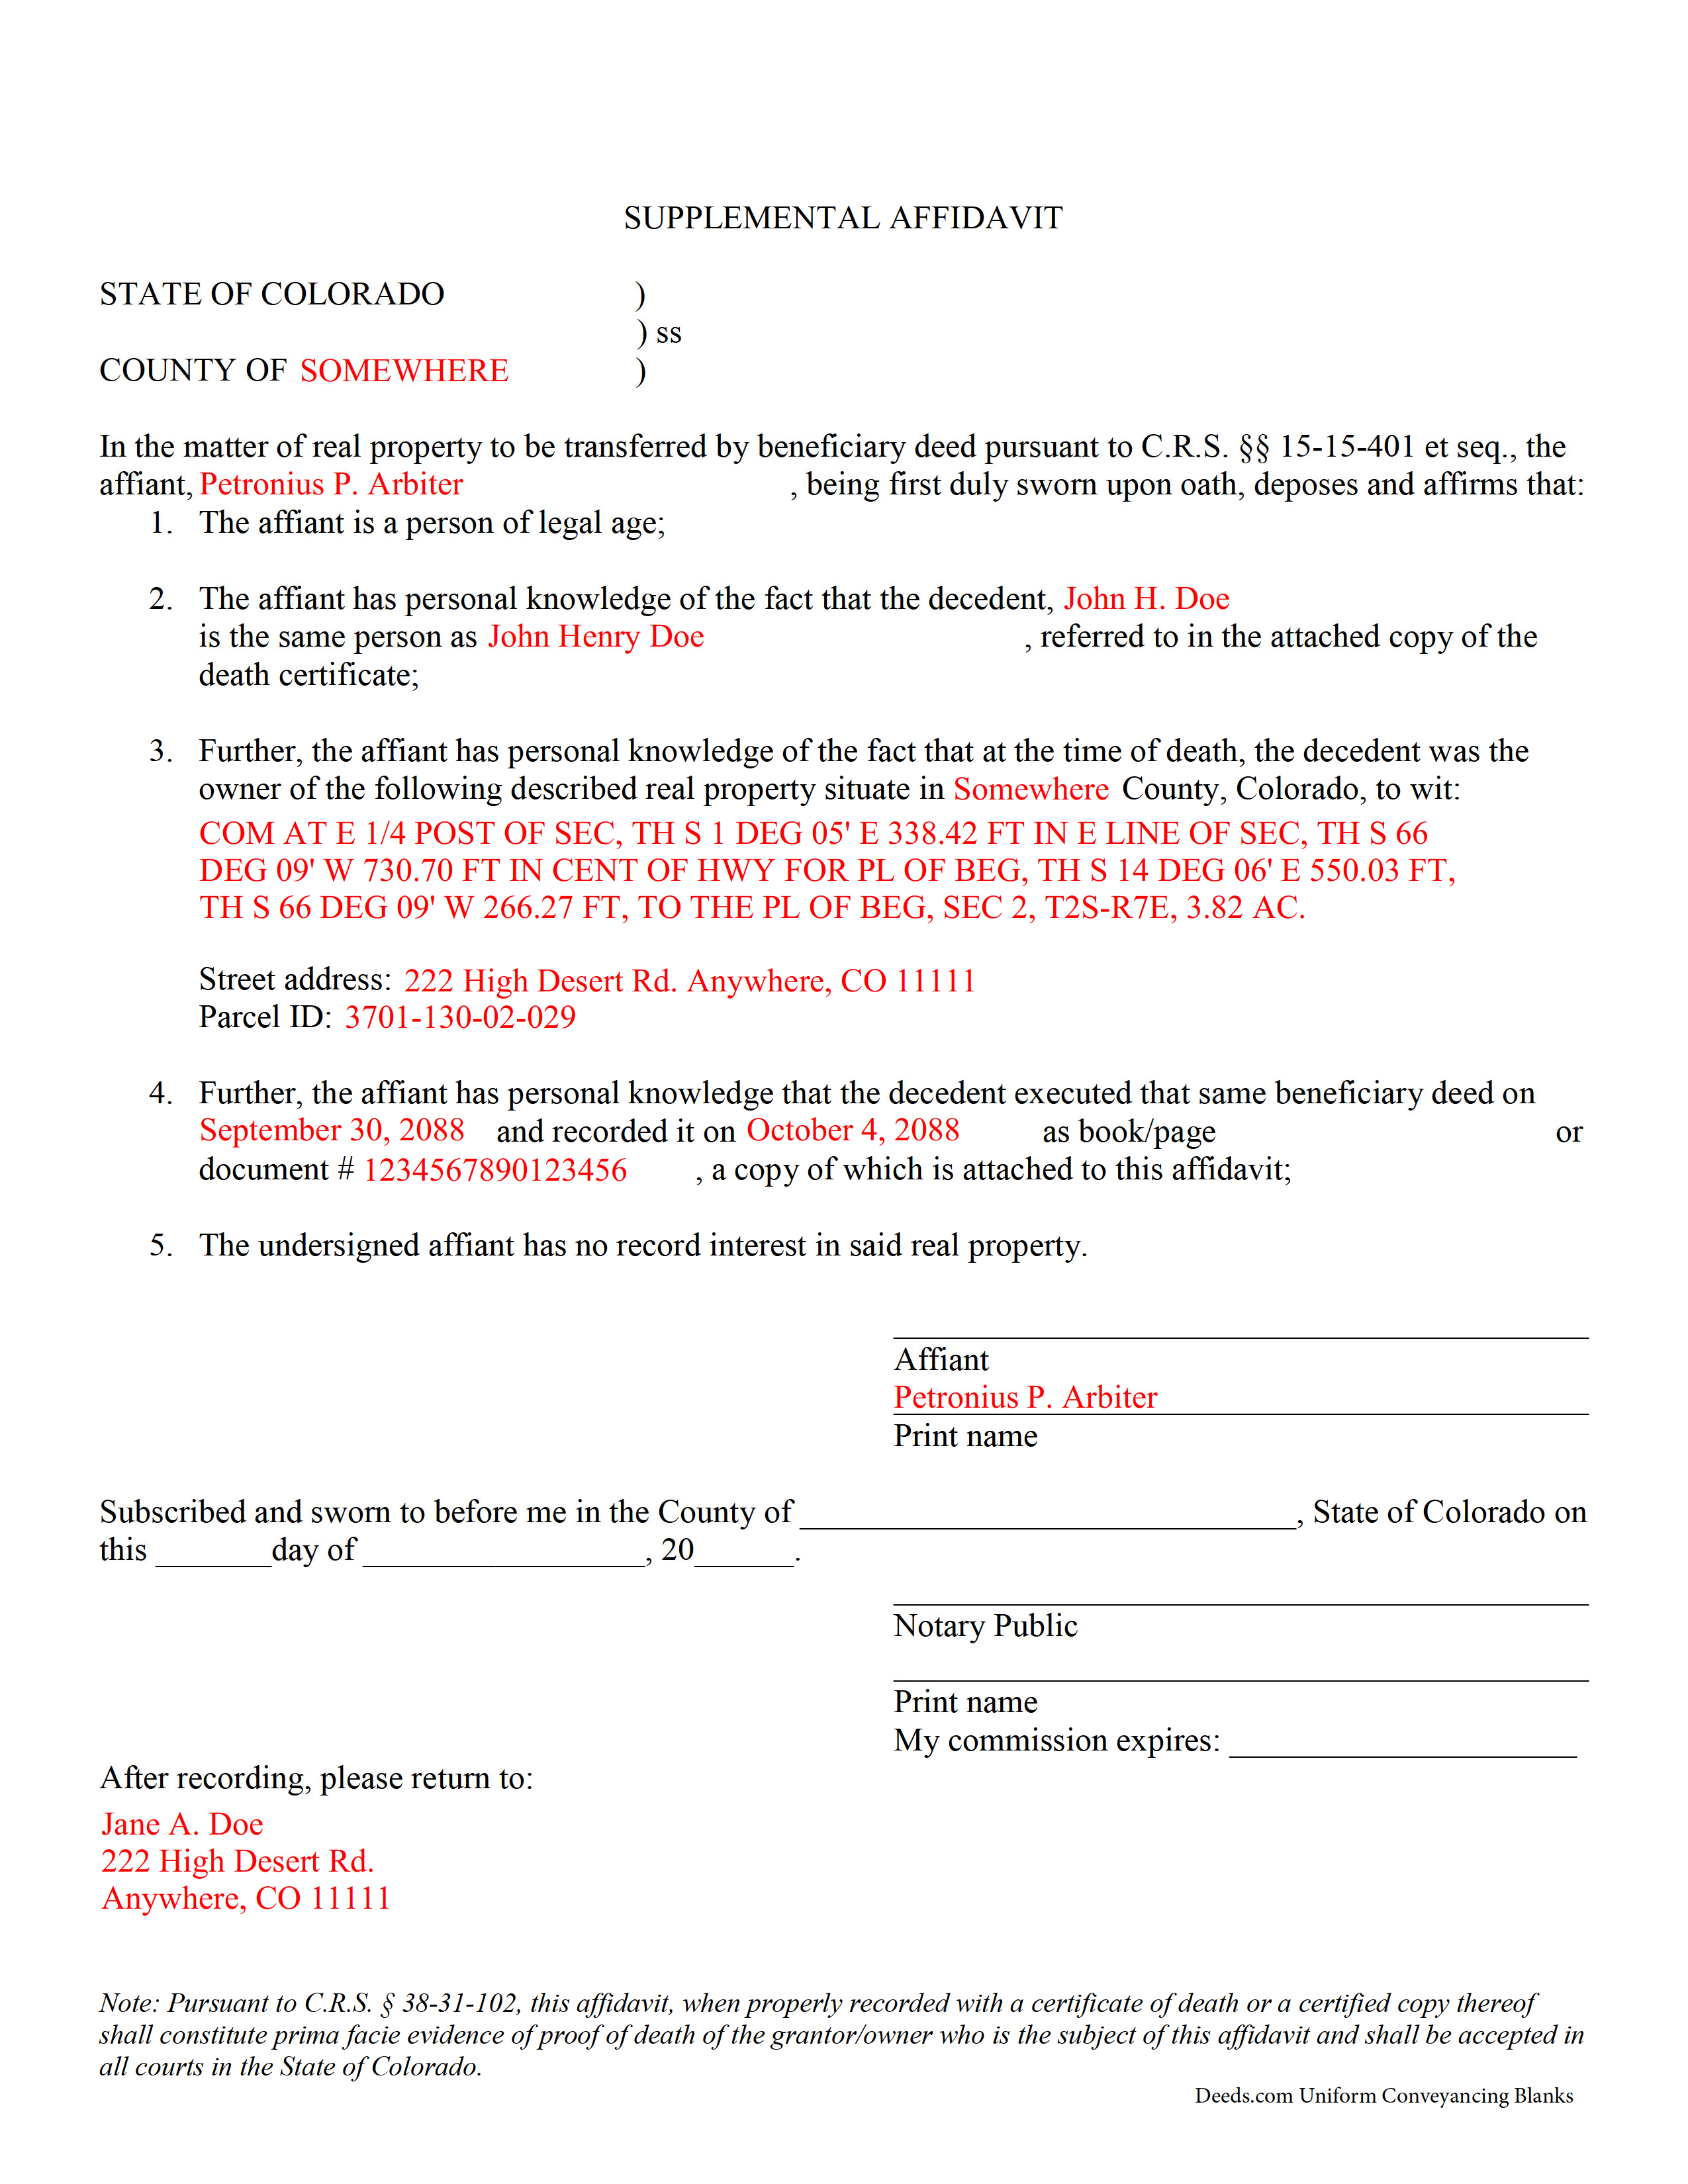 Completed Example of the Affidavit of Deceased Grantor Document